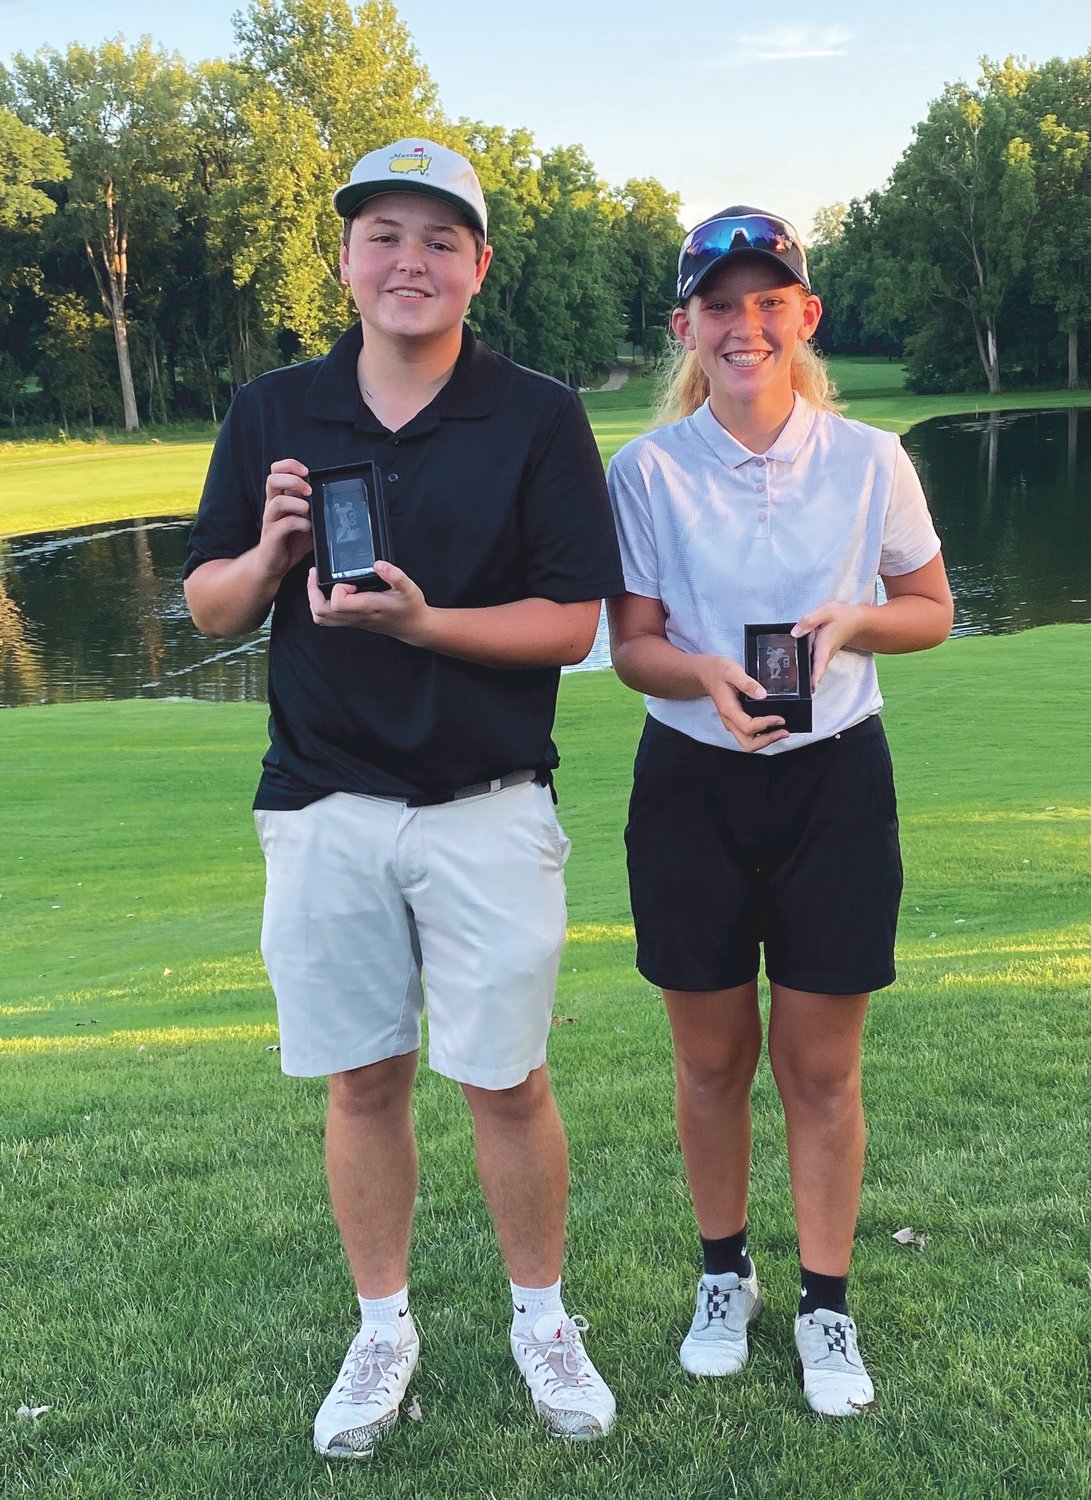 Nolan Allen, left and Addison Meadows, right, won their respective Central Indiana Junior Golf Association Invitational tournaments at Coyote Crossing Golf Course in Lafayette. .Allen, a 15-year-old, won the 15-18 year old tournament, while Meadows, age 13, won the 13-14 age group. Both Allen and Meadows attend Southmont Schools.